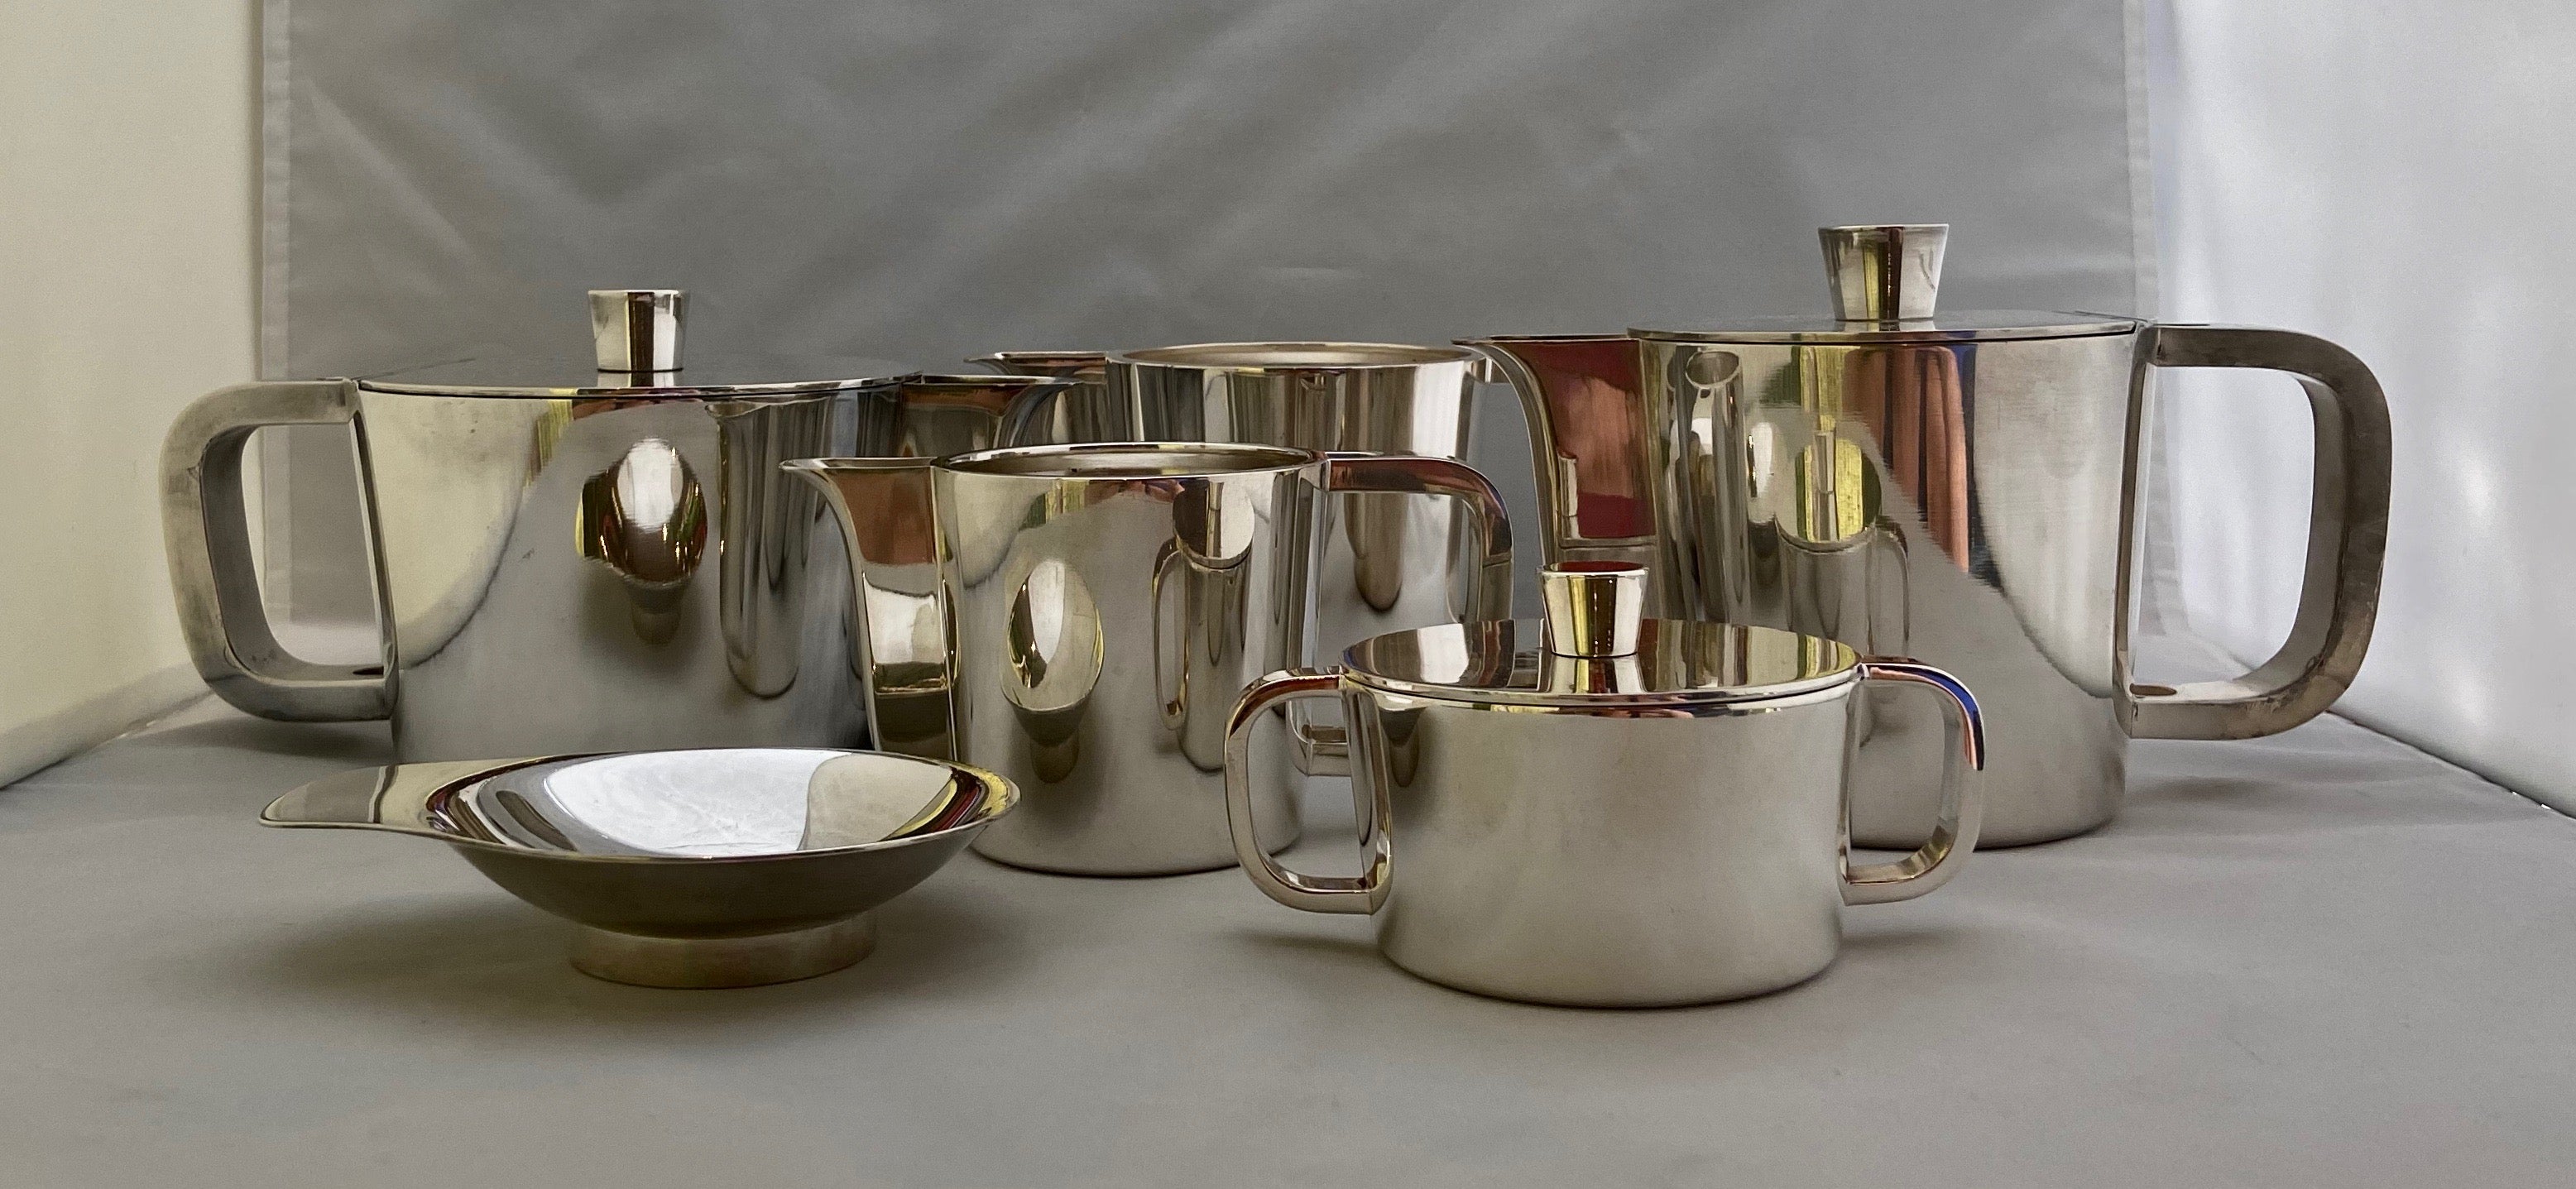 Mid-Century Modern Extensive Silver Plated Gio Ponti Coffee and Tea Set on a Tray, Arthur Krupp